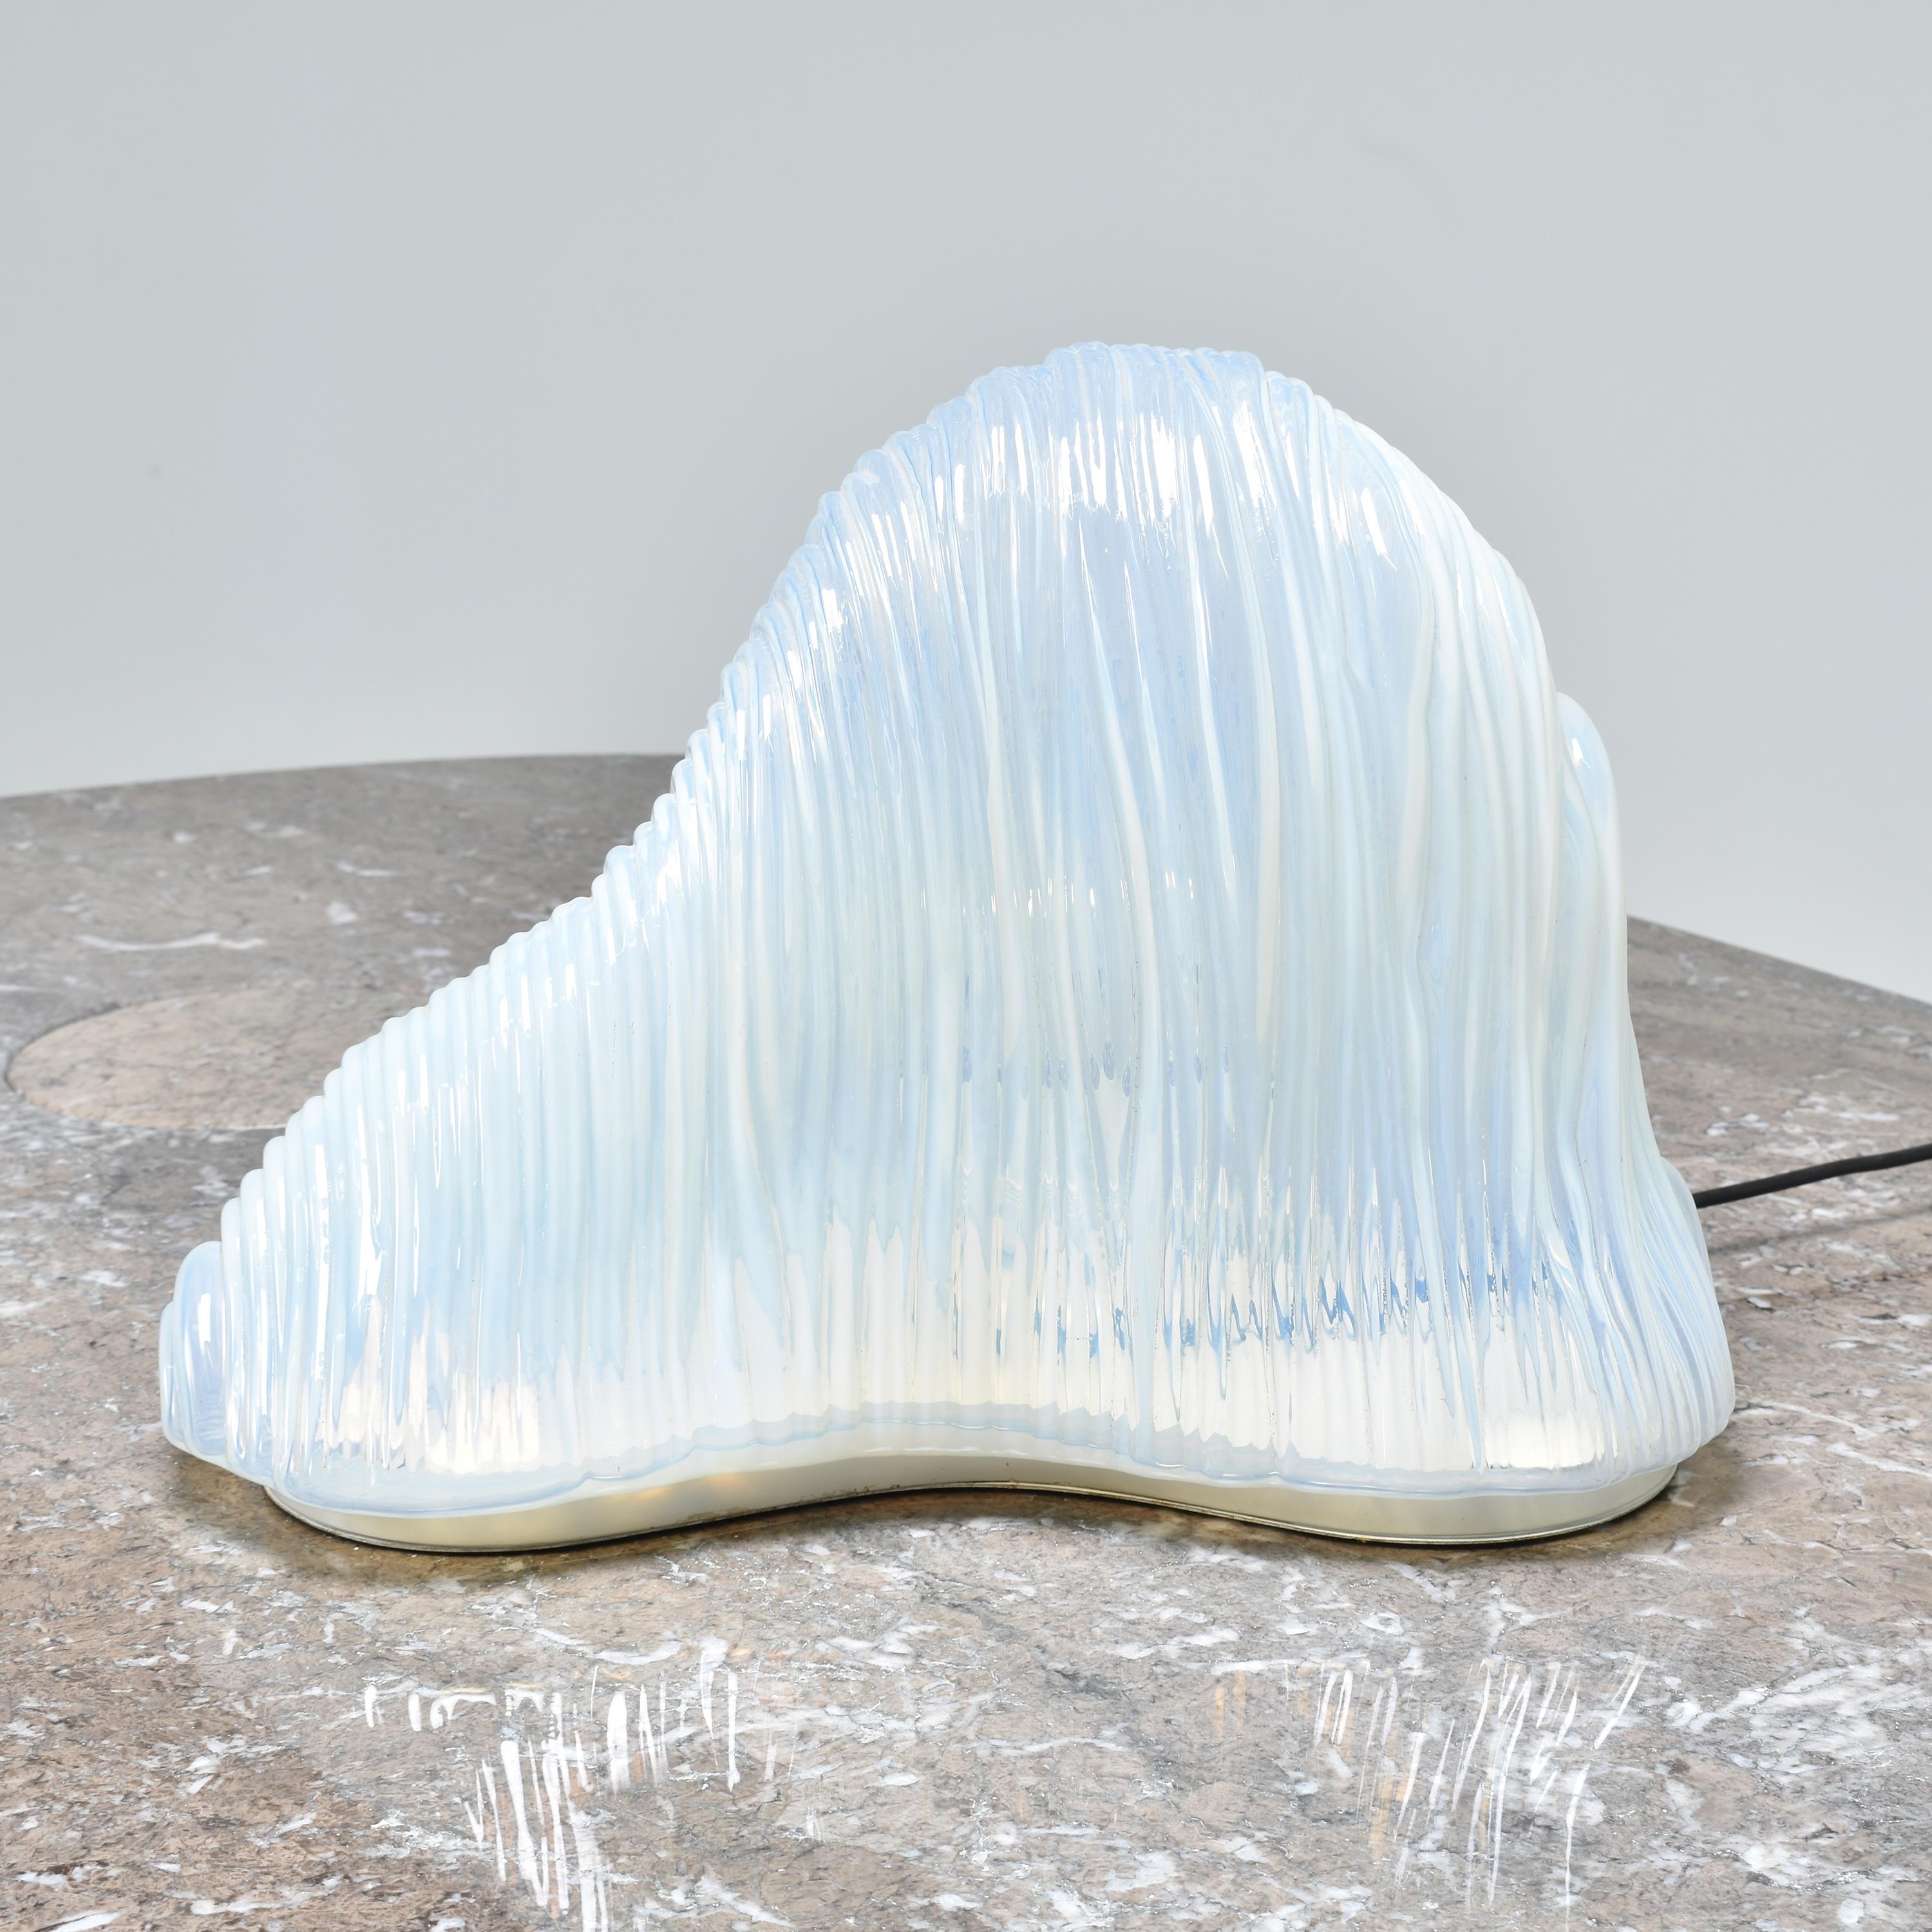 Carlo Nason big Iceberg table lamp.
Opaline glass and white-lacquered metal.
The Murano glas is blown in mold, and gives an opalescent light.
Rare big model, in very good condition.